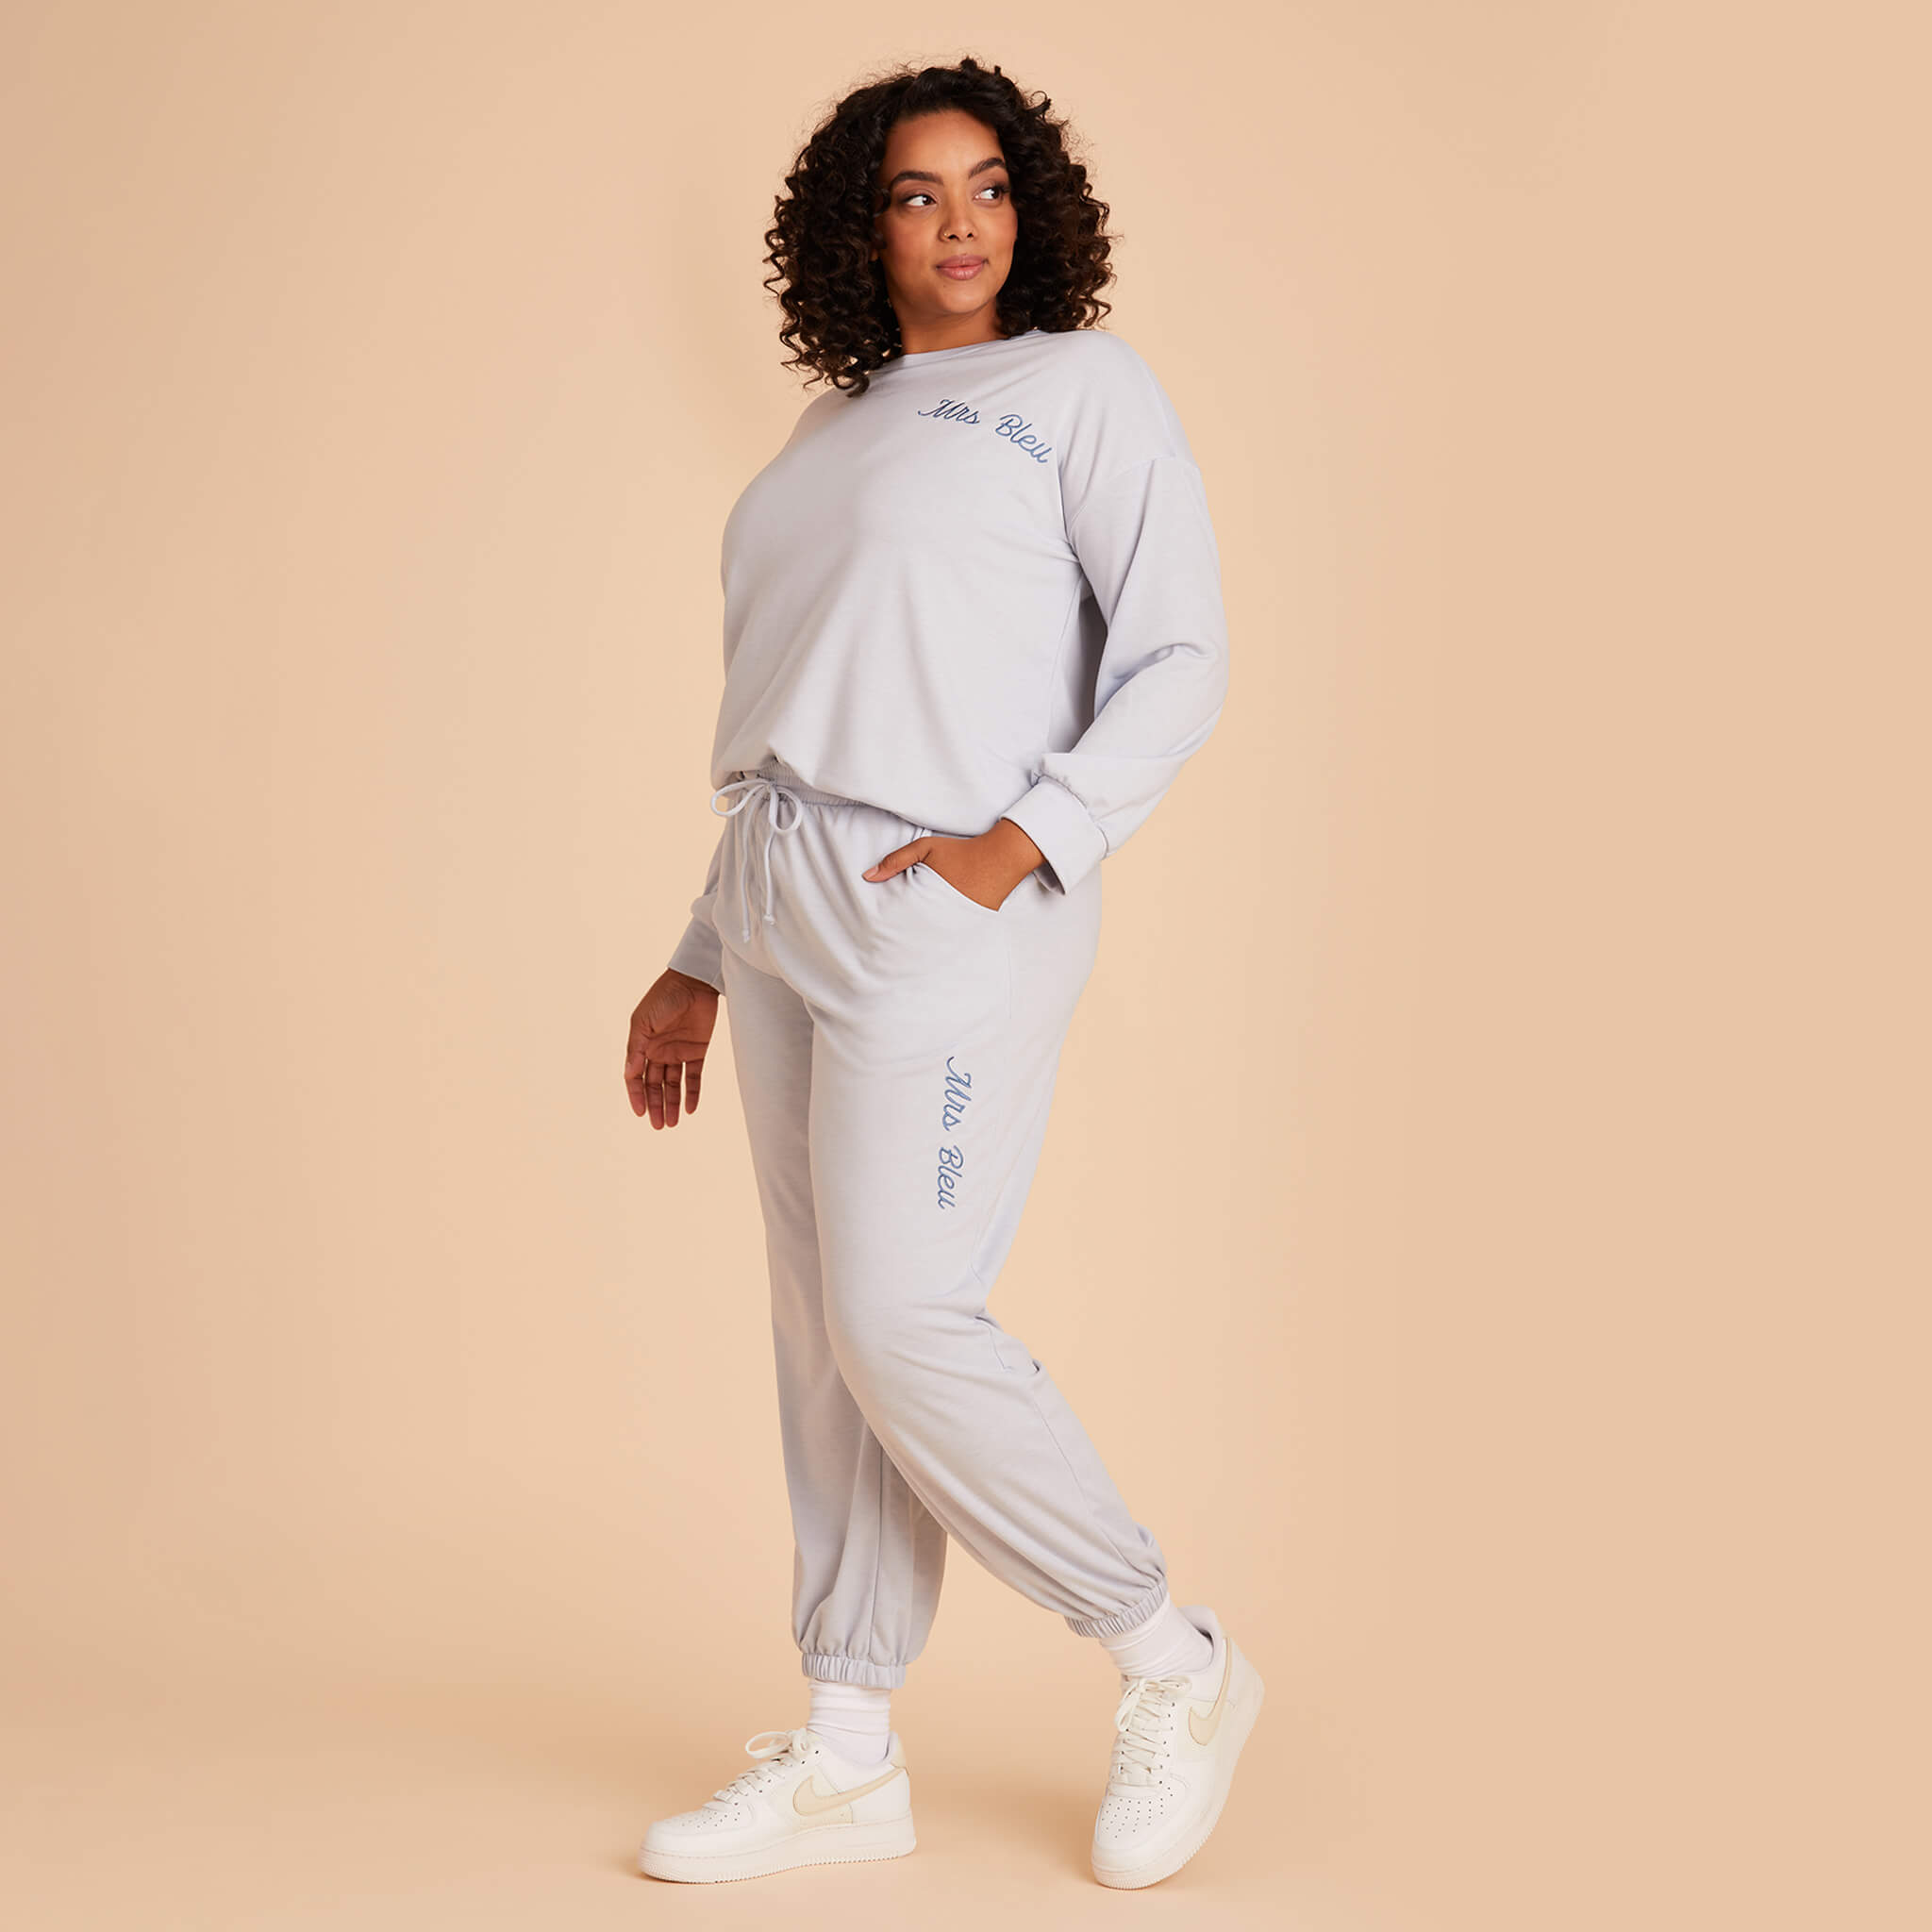 Plus Size Light Blue sweatpants and crewneck with personalization